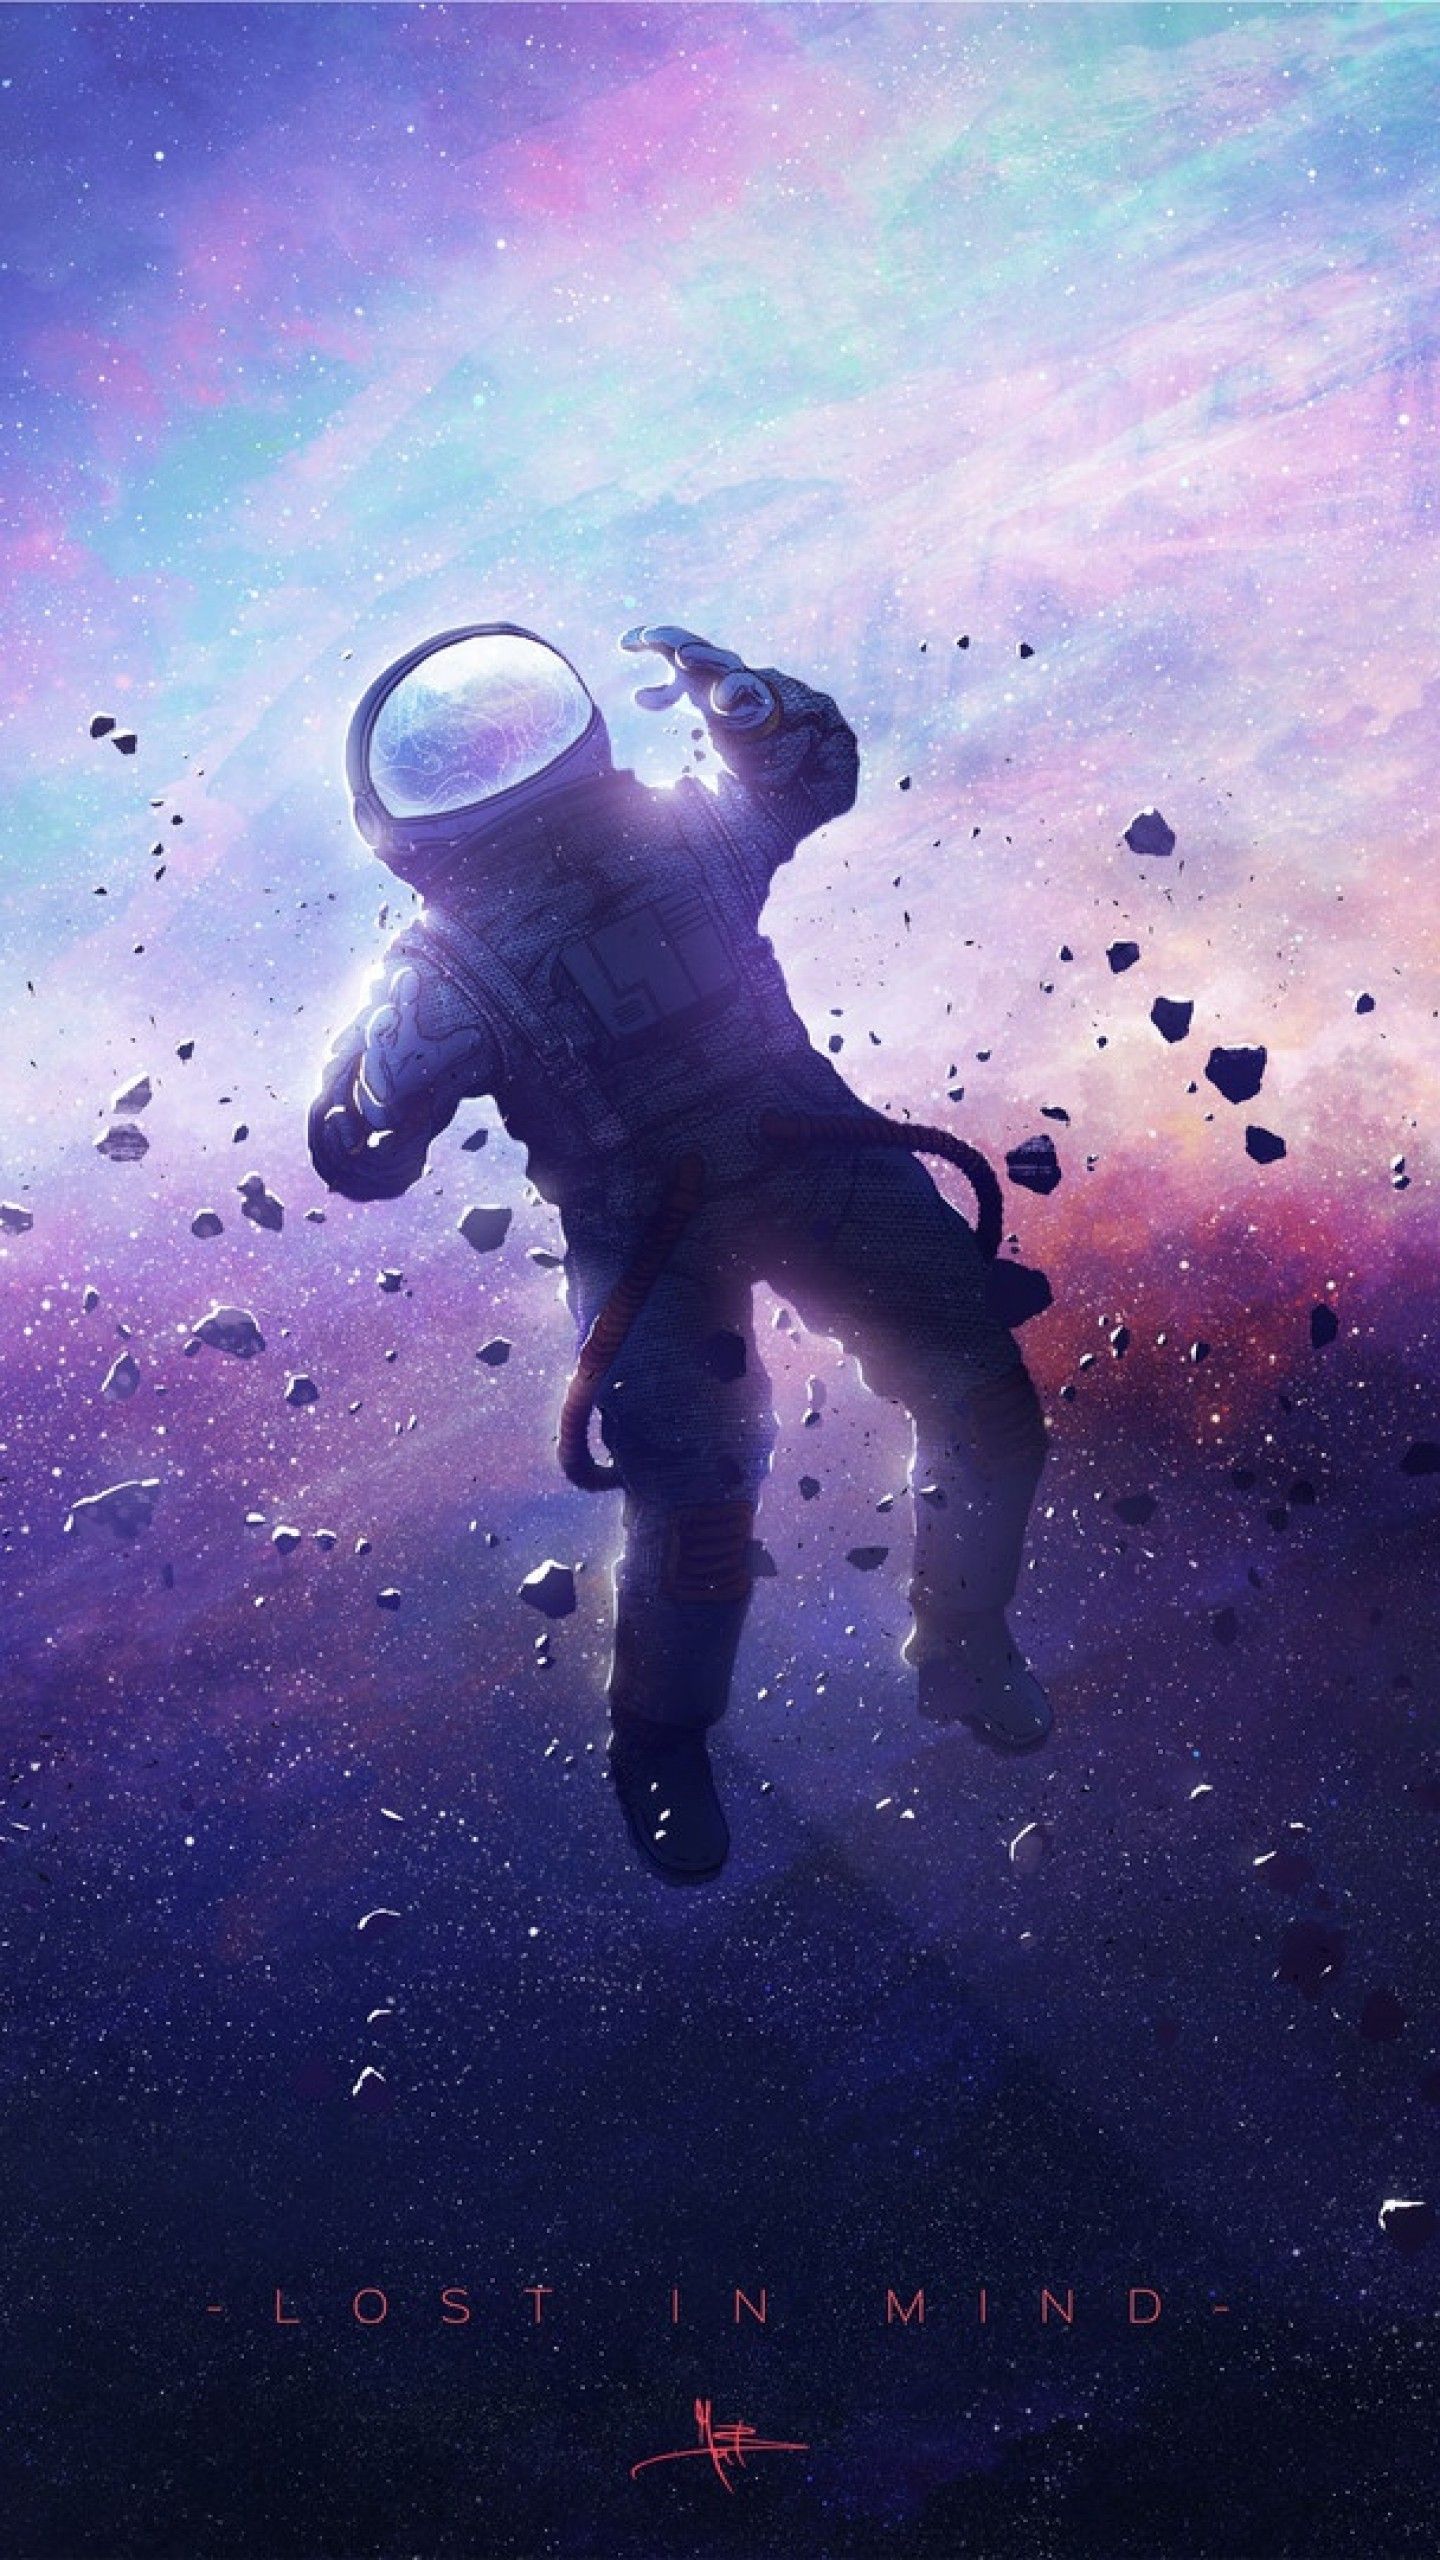 Space Astronaut Stars Wallpapers - Wallpaper Cave